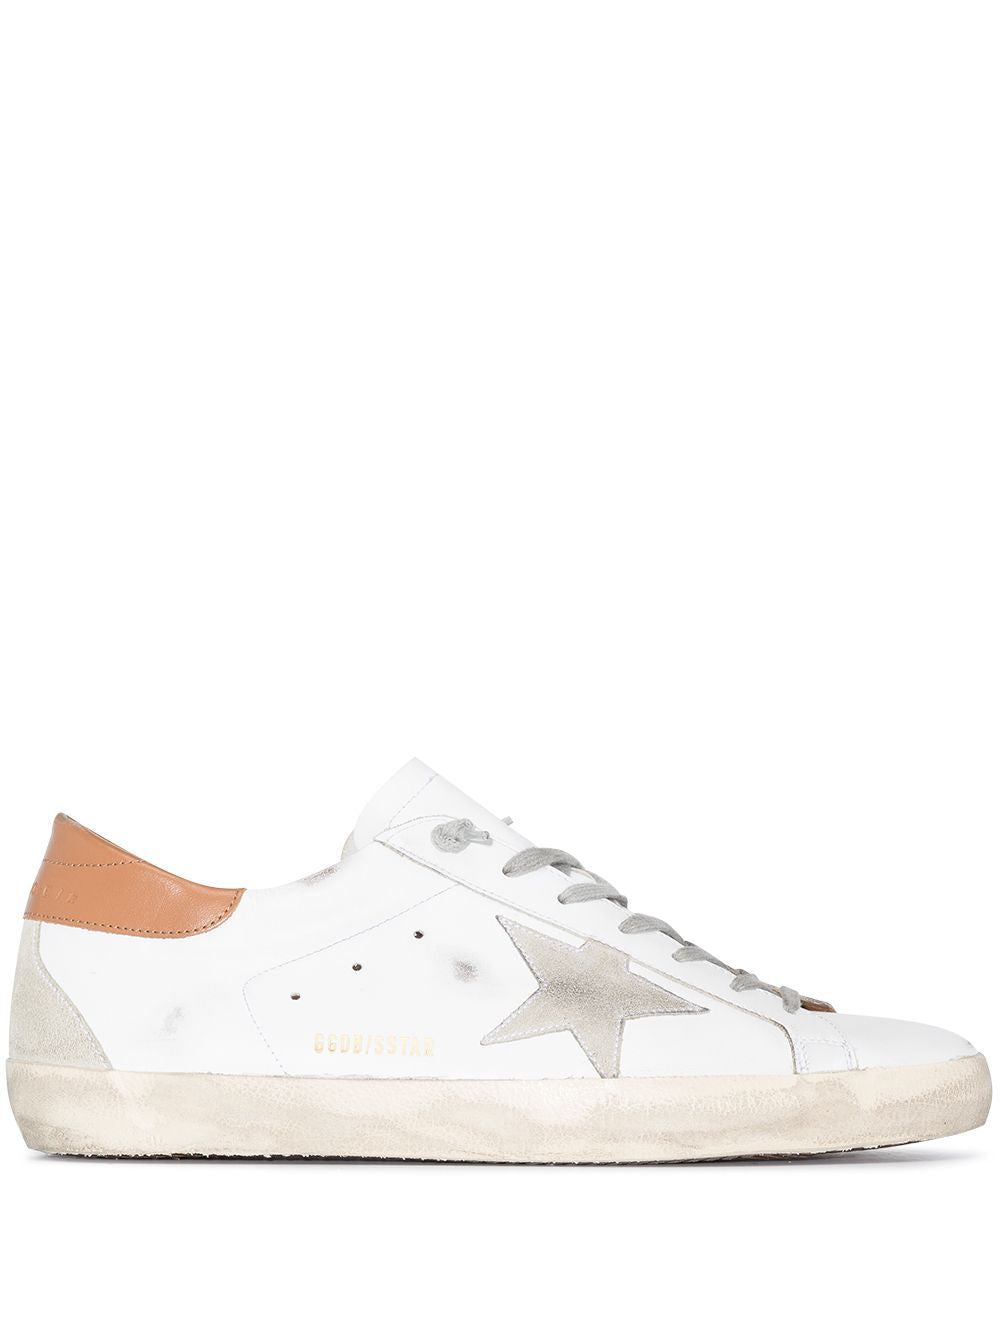 GOLDEN GOOSE Stylish Multicolour Leather Sneakers for Men